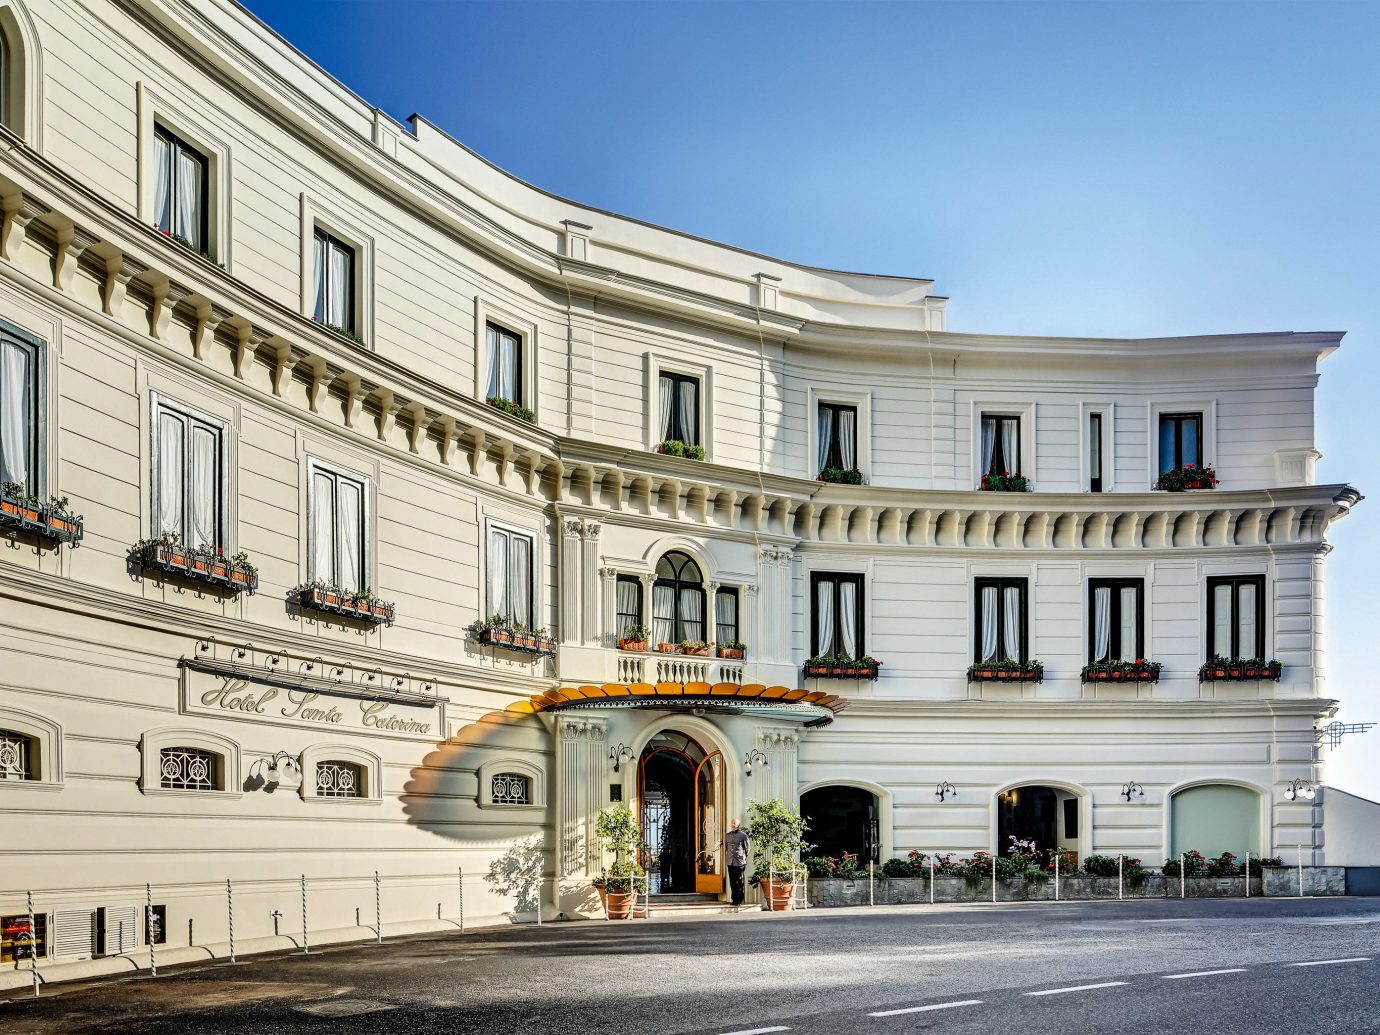 Hotels Romance sky outdoor building classical architecture landmark Architecture palace facade window plaza white real estate estate château town square tourism apartment mansion City government building